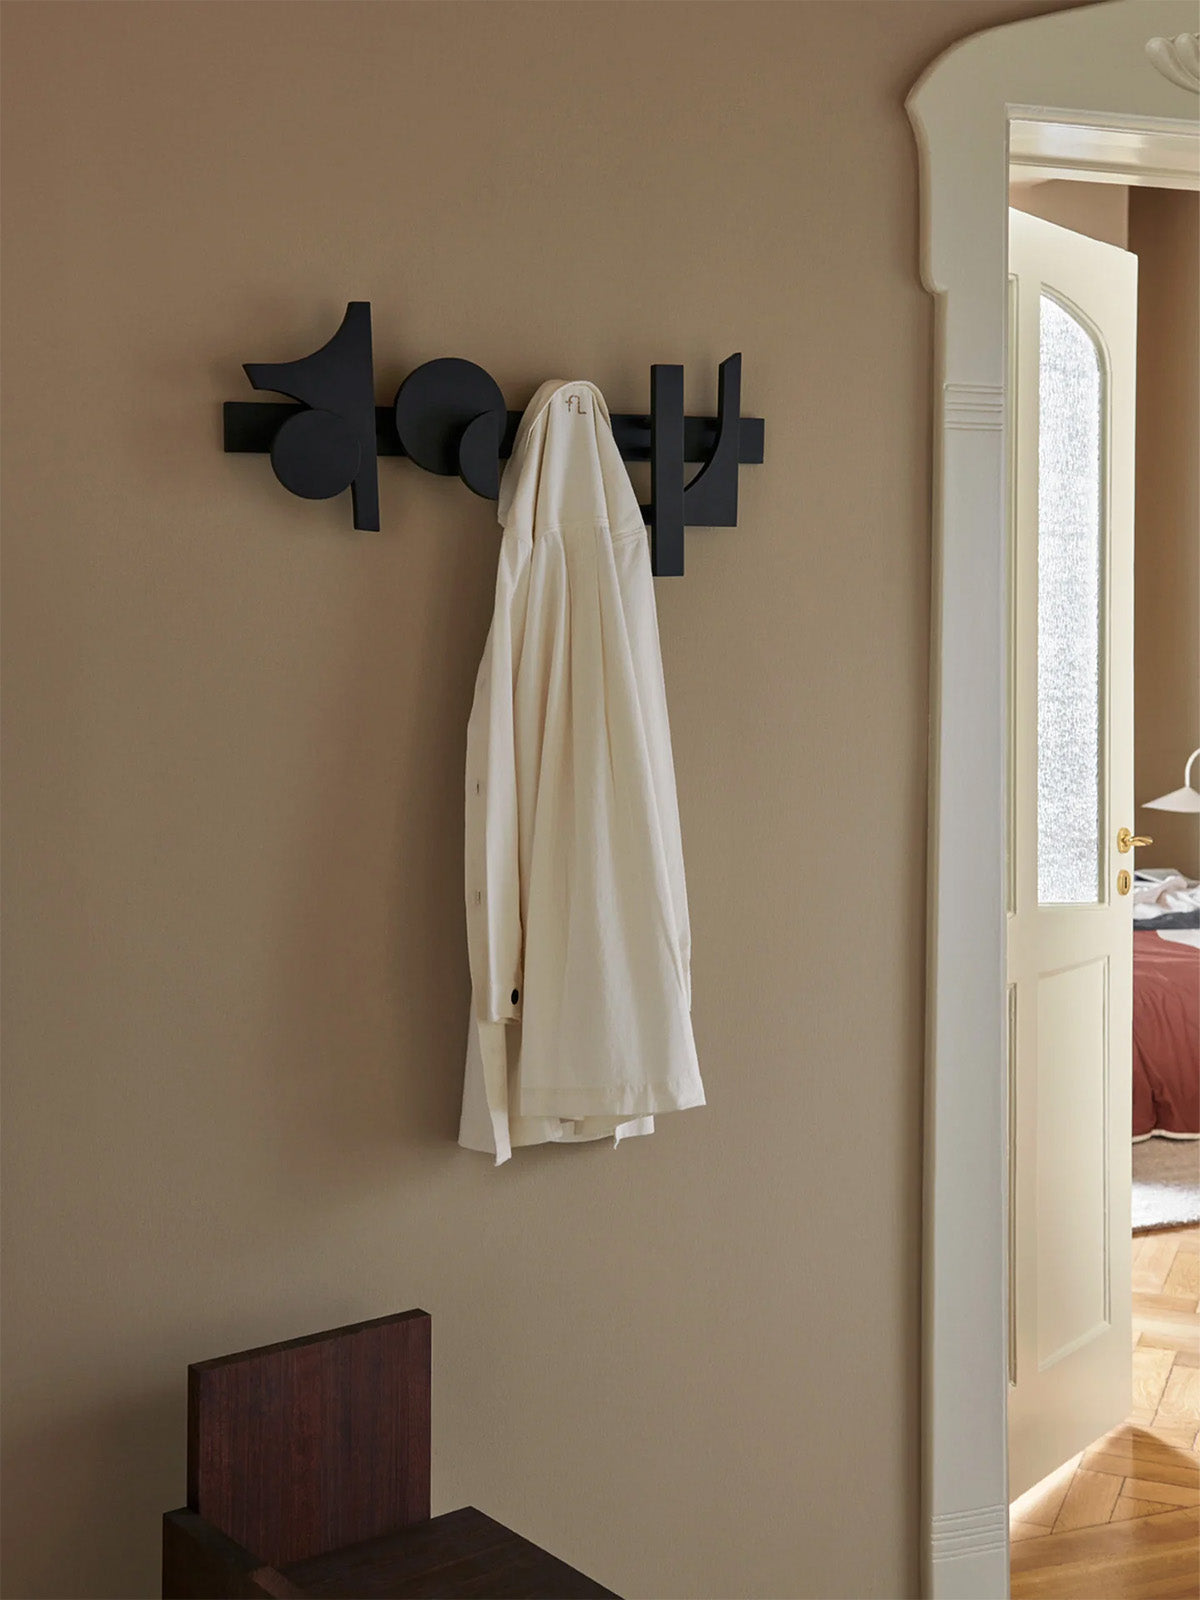 Cupe Wall Hook Rack